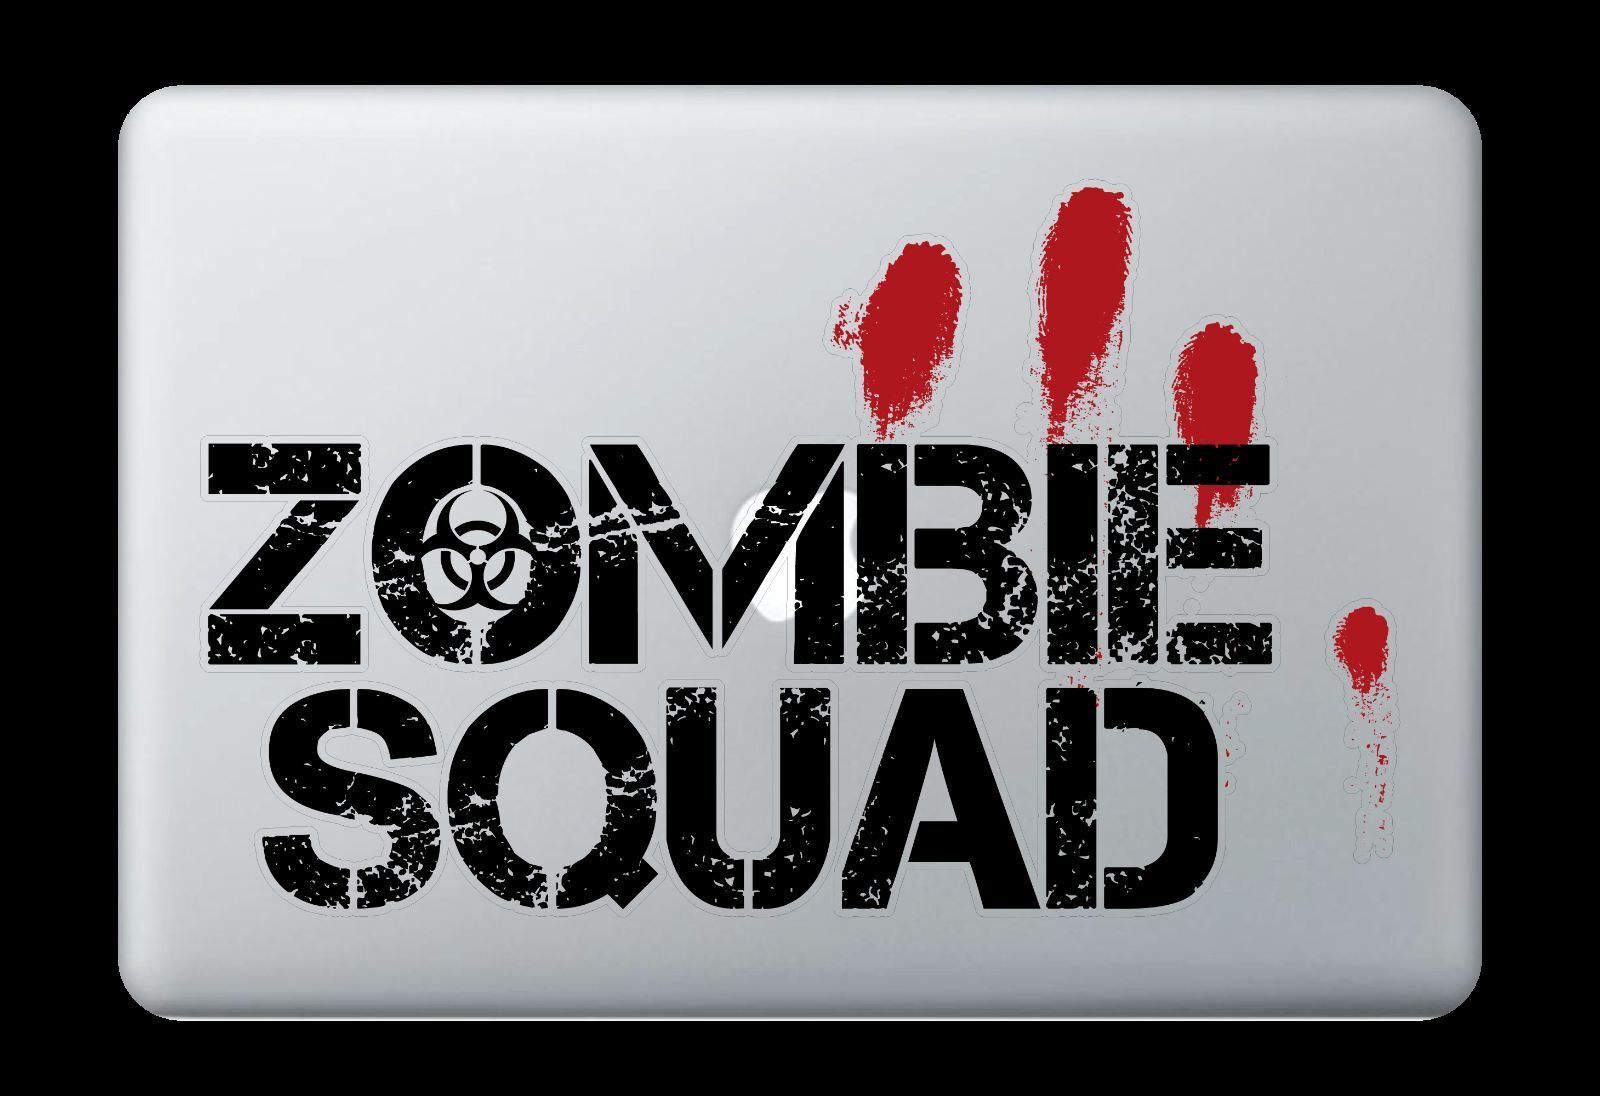 Zombie 5 popular Squad Sticker Apple Mac Book Dell Pro Un Decal Recommended Laptop Air